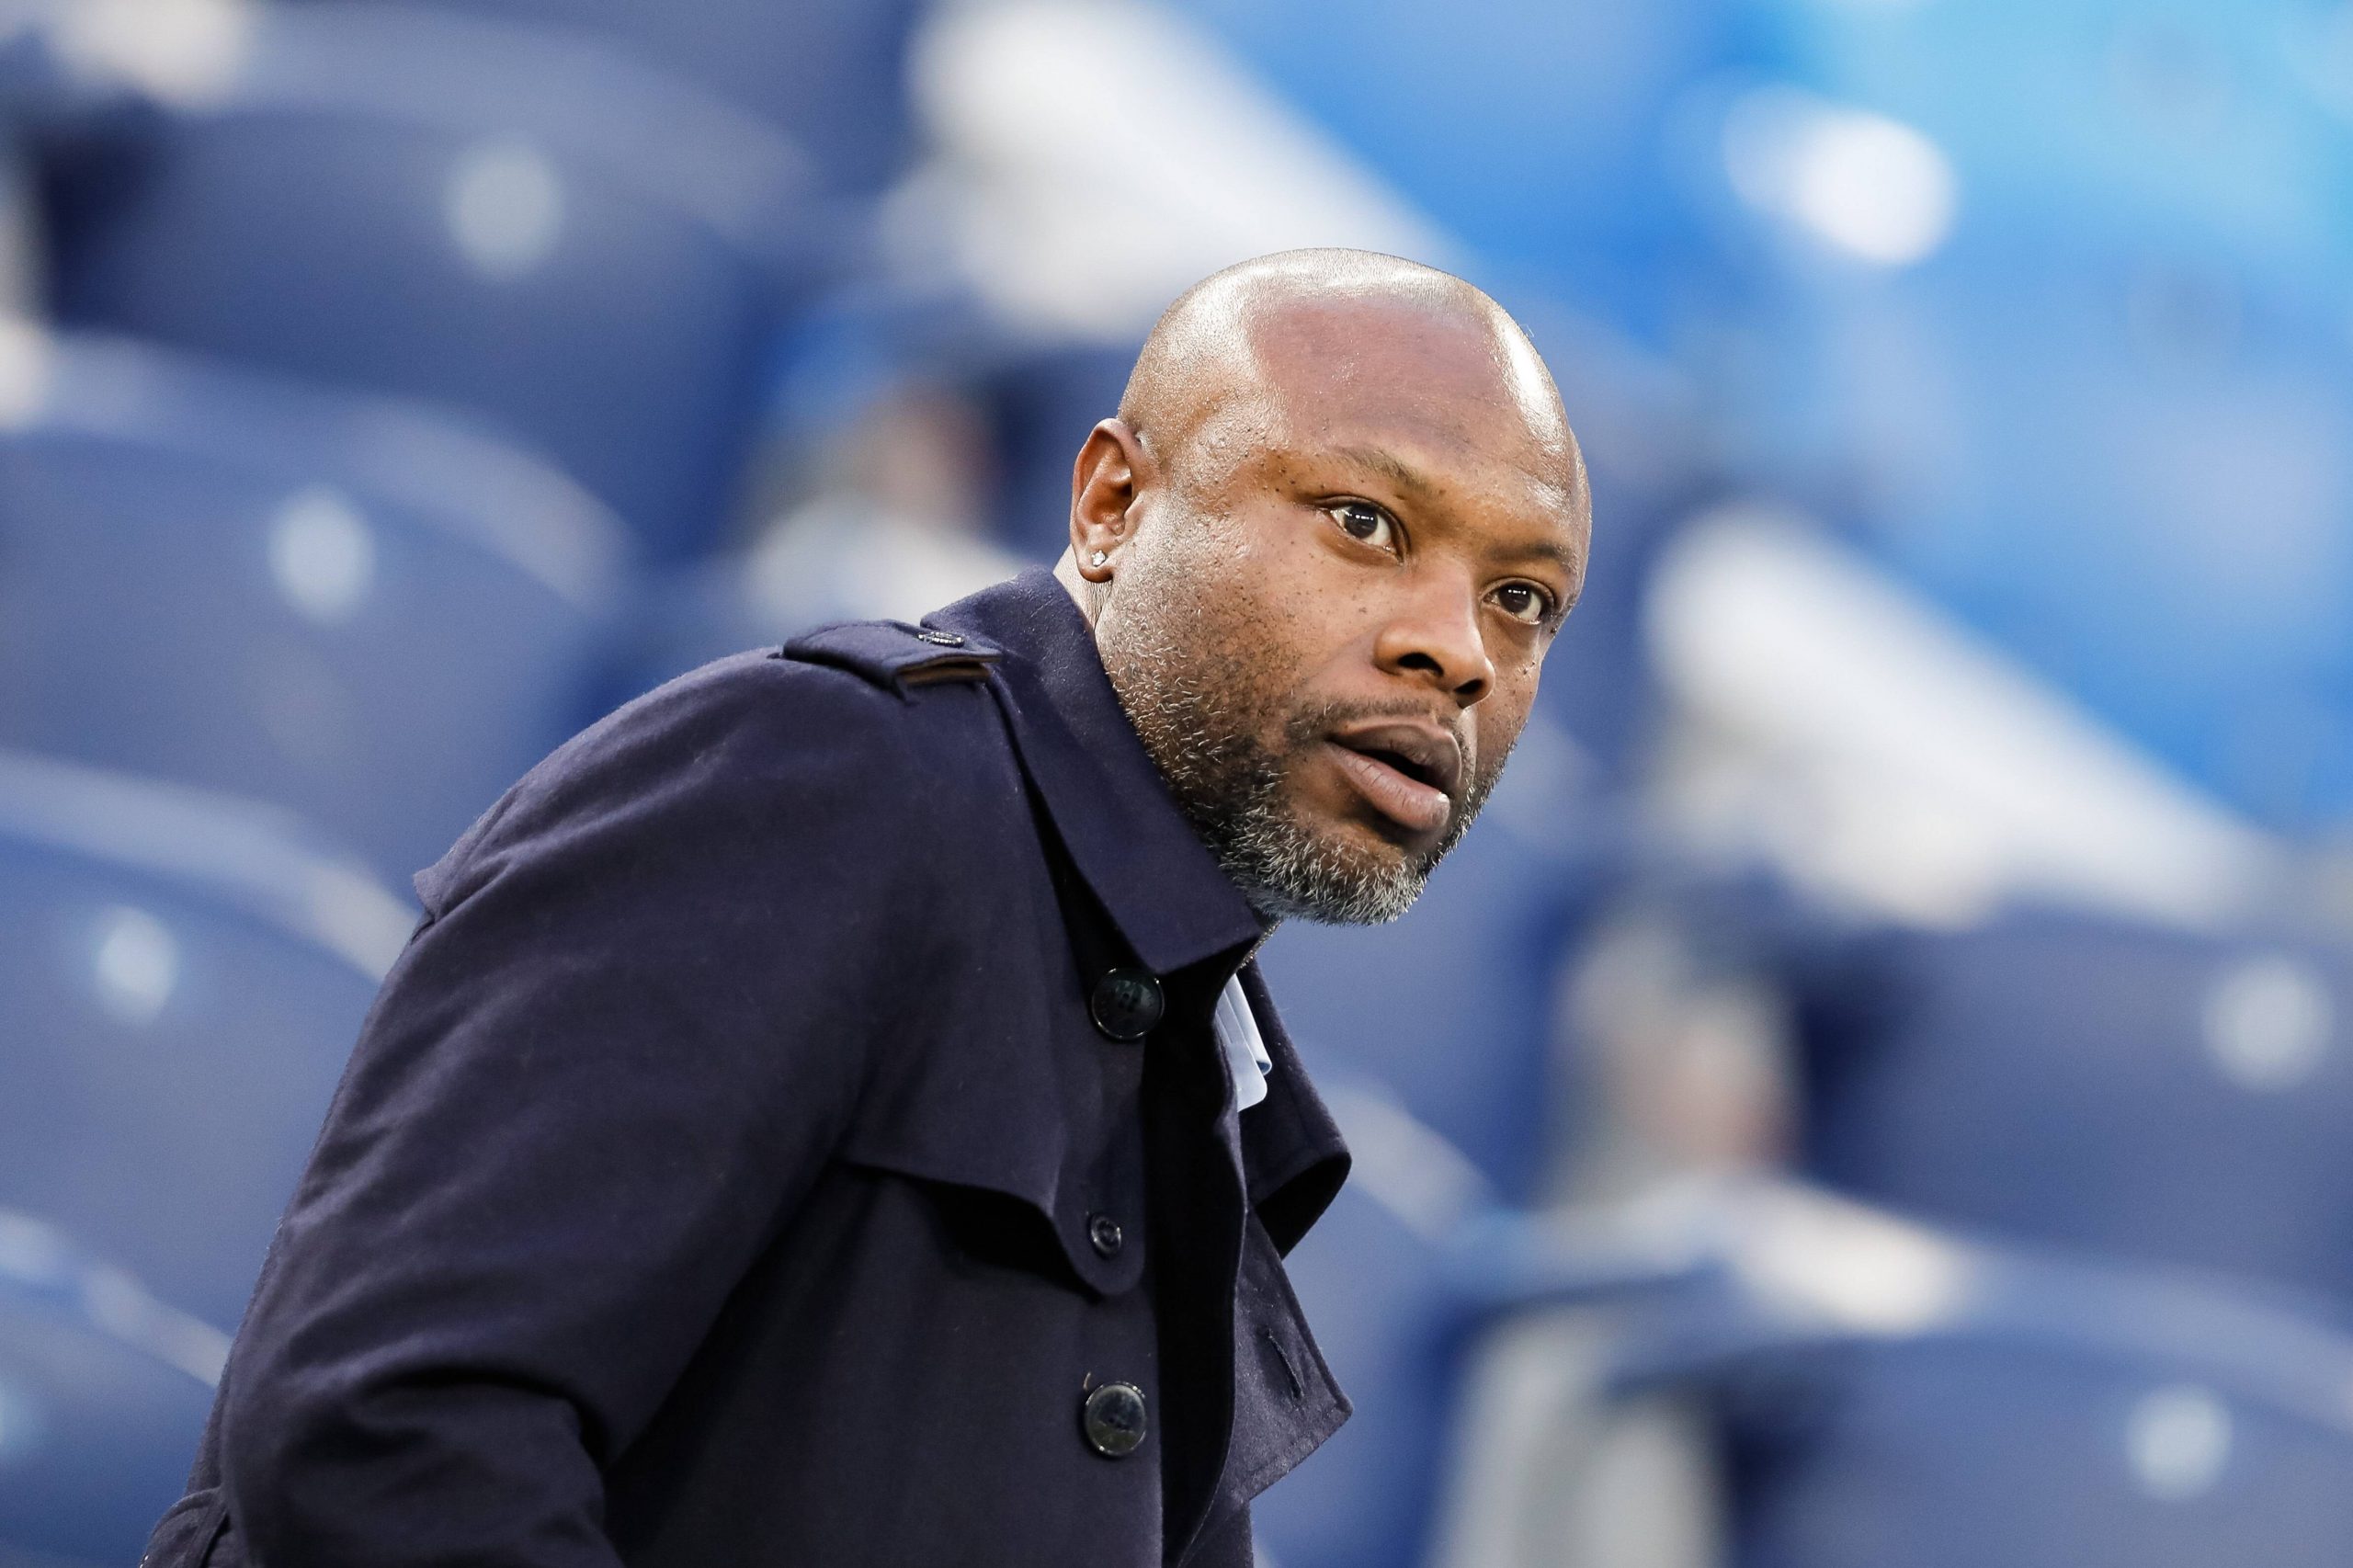 March 26 2018 Saint Petersburg Russia Former French football player William Gallas attends Fra